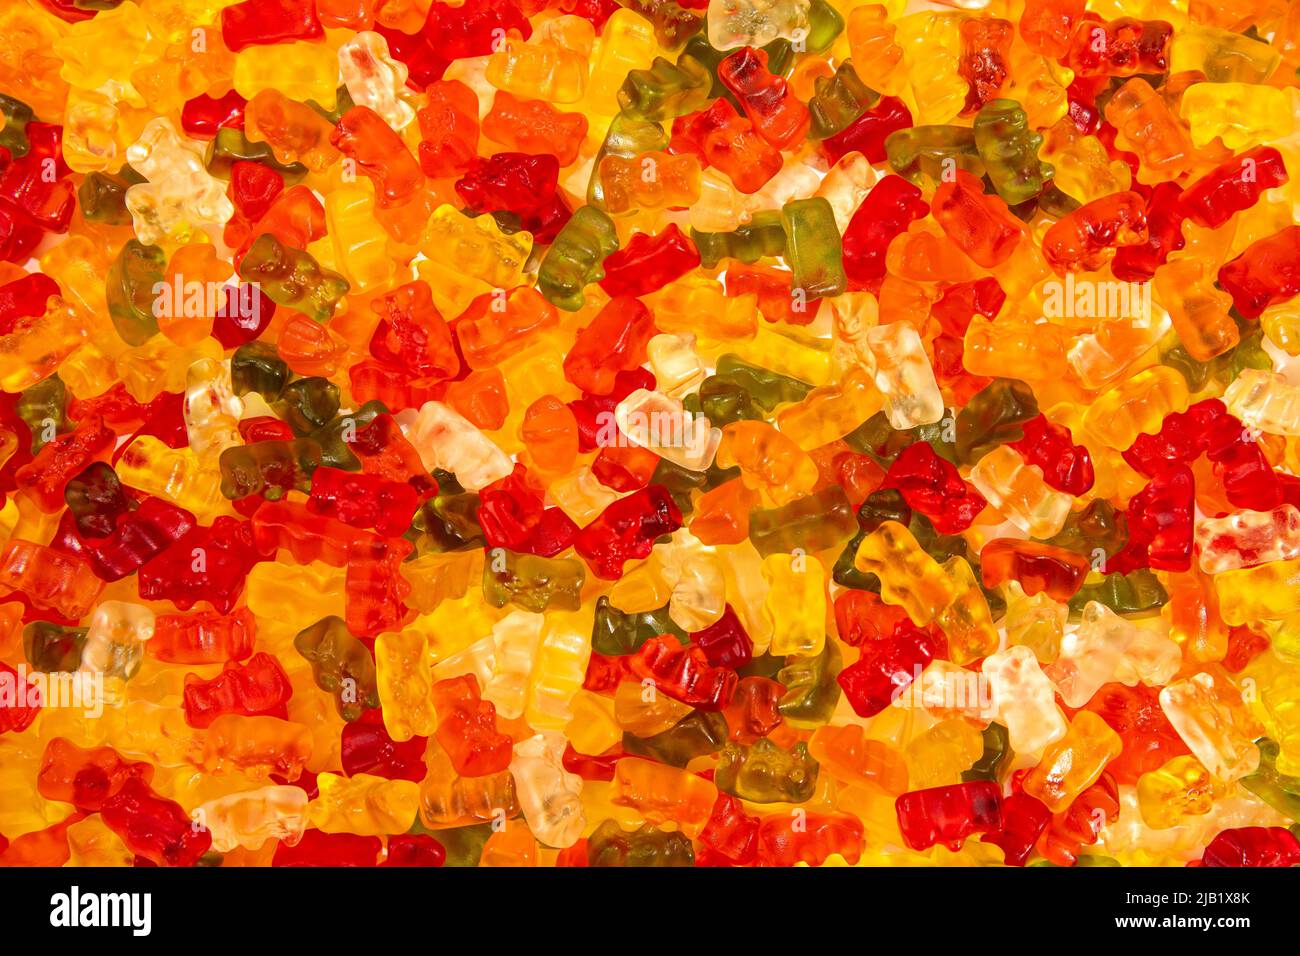 Delicious Colorful Gummy Bears Candy Texture Stock Photo